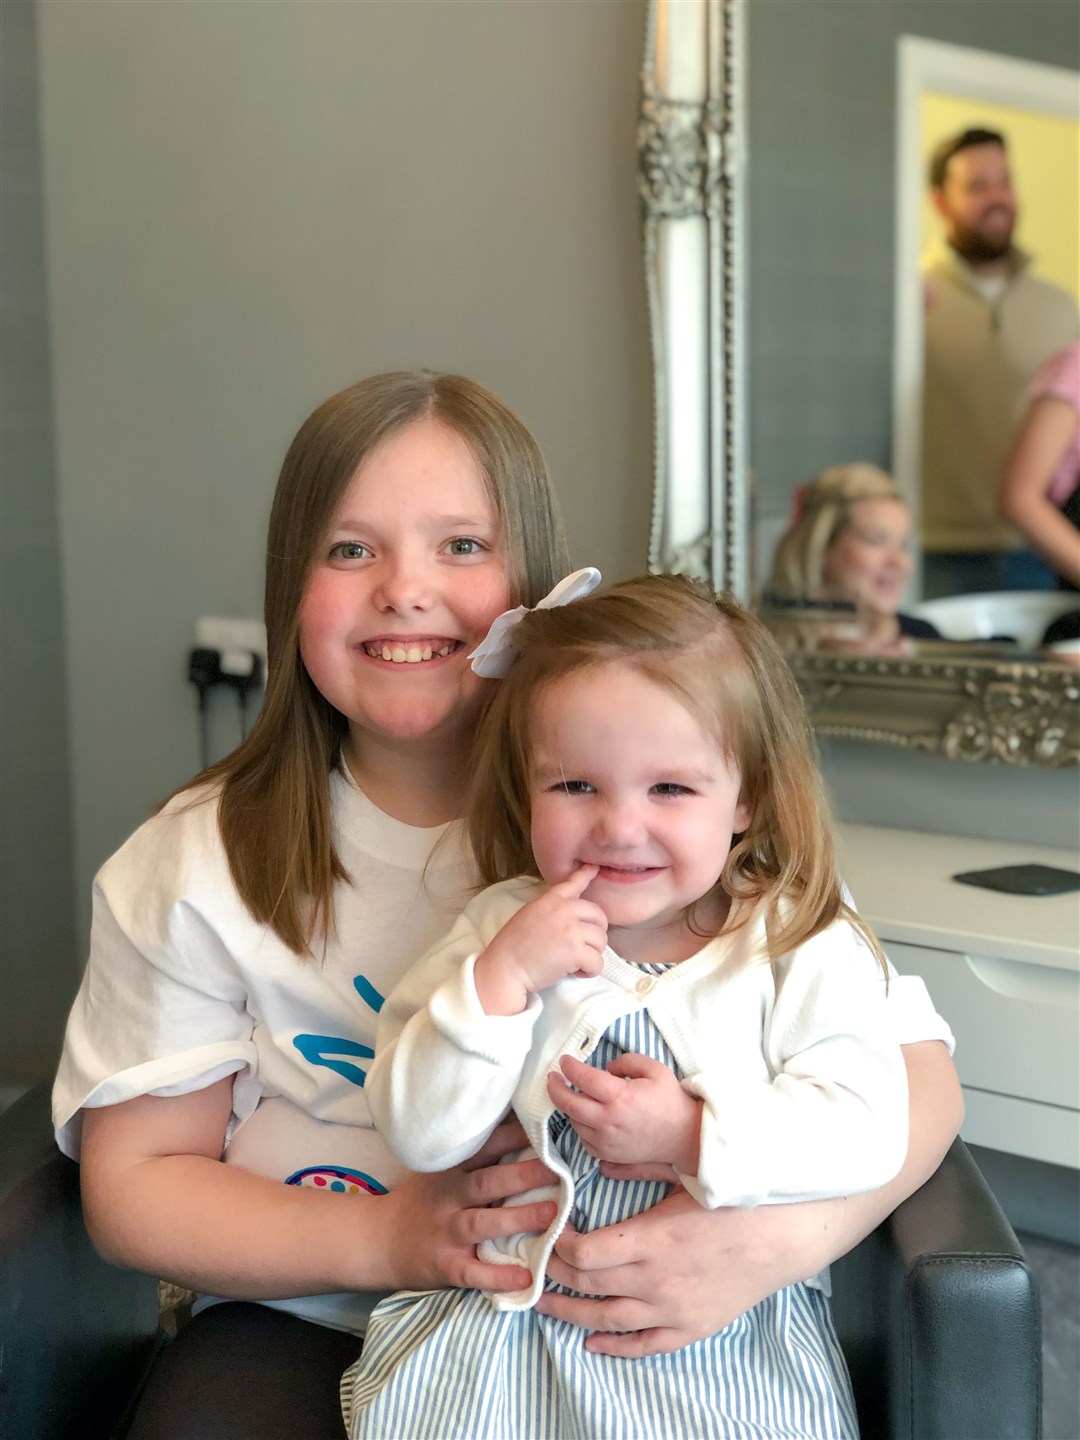 Jessica Fraser (left) was inspired by her little pal Adeline, who is two-and-a-half, to lose 10 inches of her locks to boost two charities close to her heart.